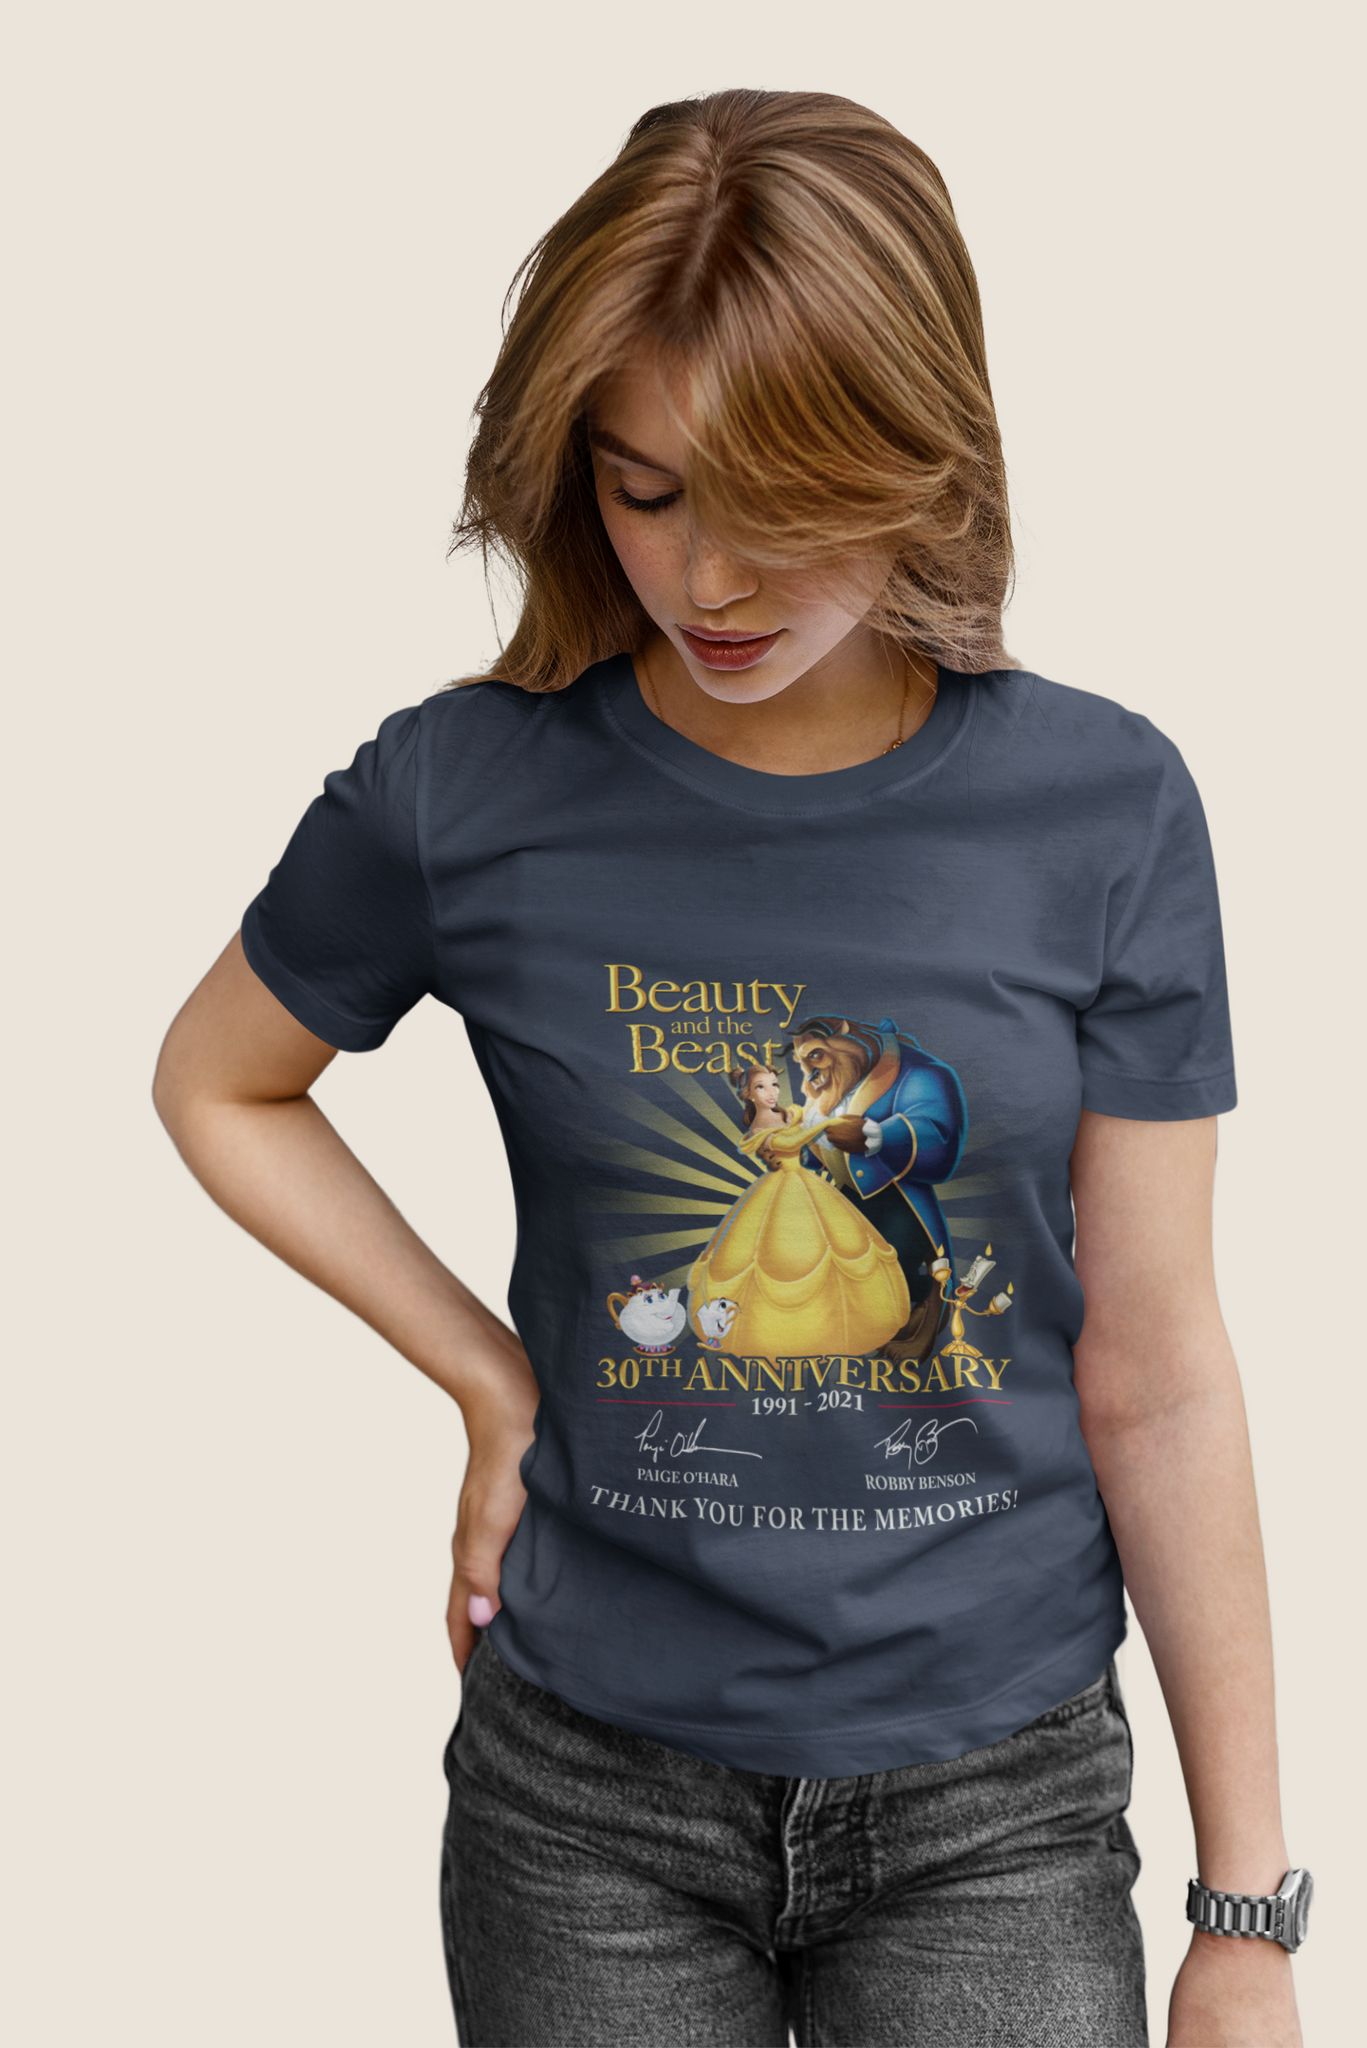 Disney Beauty And The Beast T Shirt, Happy 30th Anniversary 1991 2021 Tshirt, The Beast Belle T Shirt